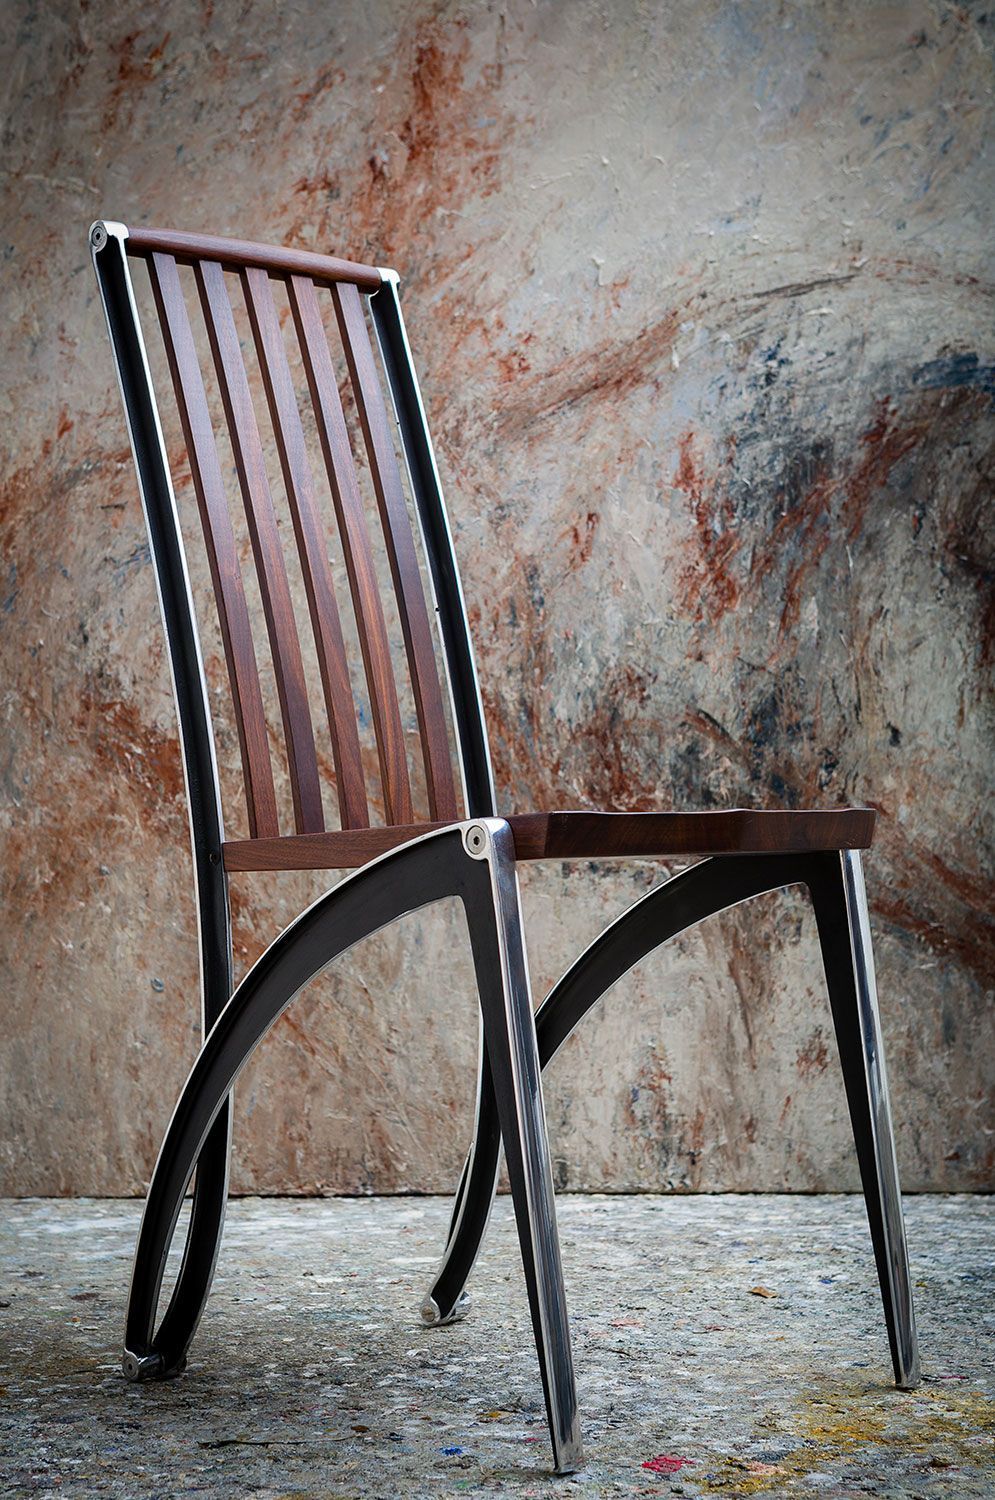 A handcrafted wooden chair with metal legs is sitting in front of a wall.